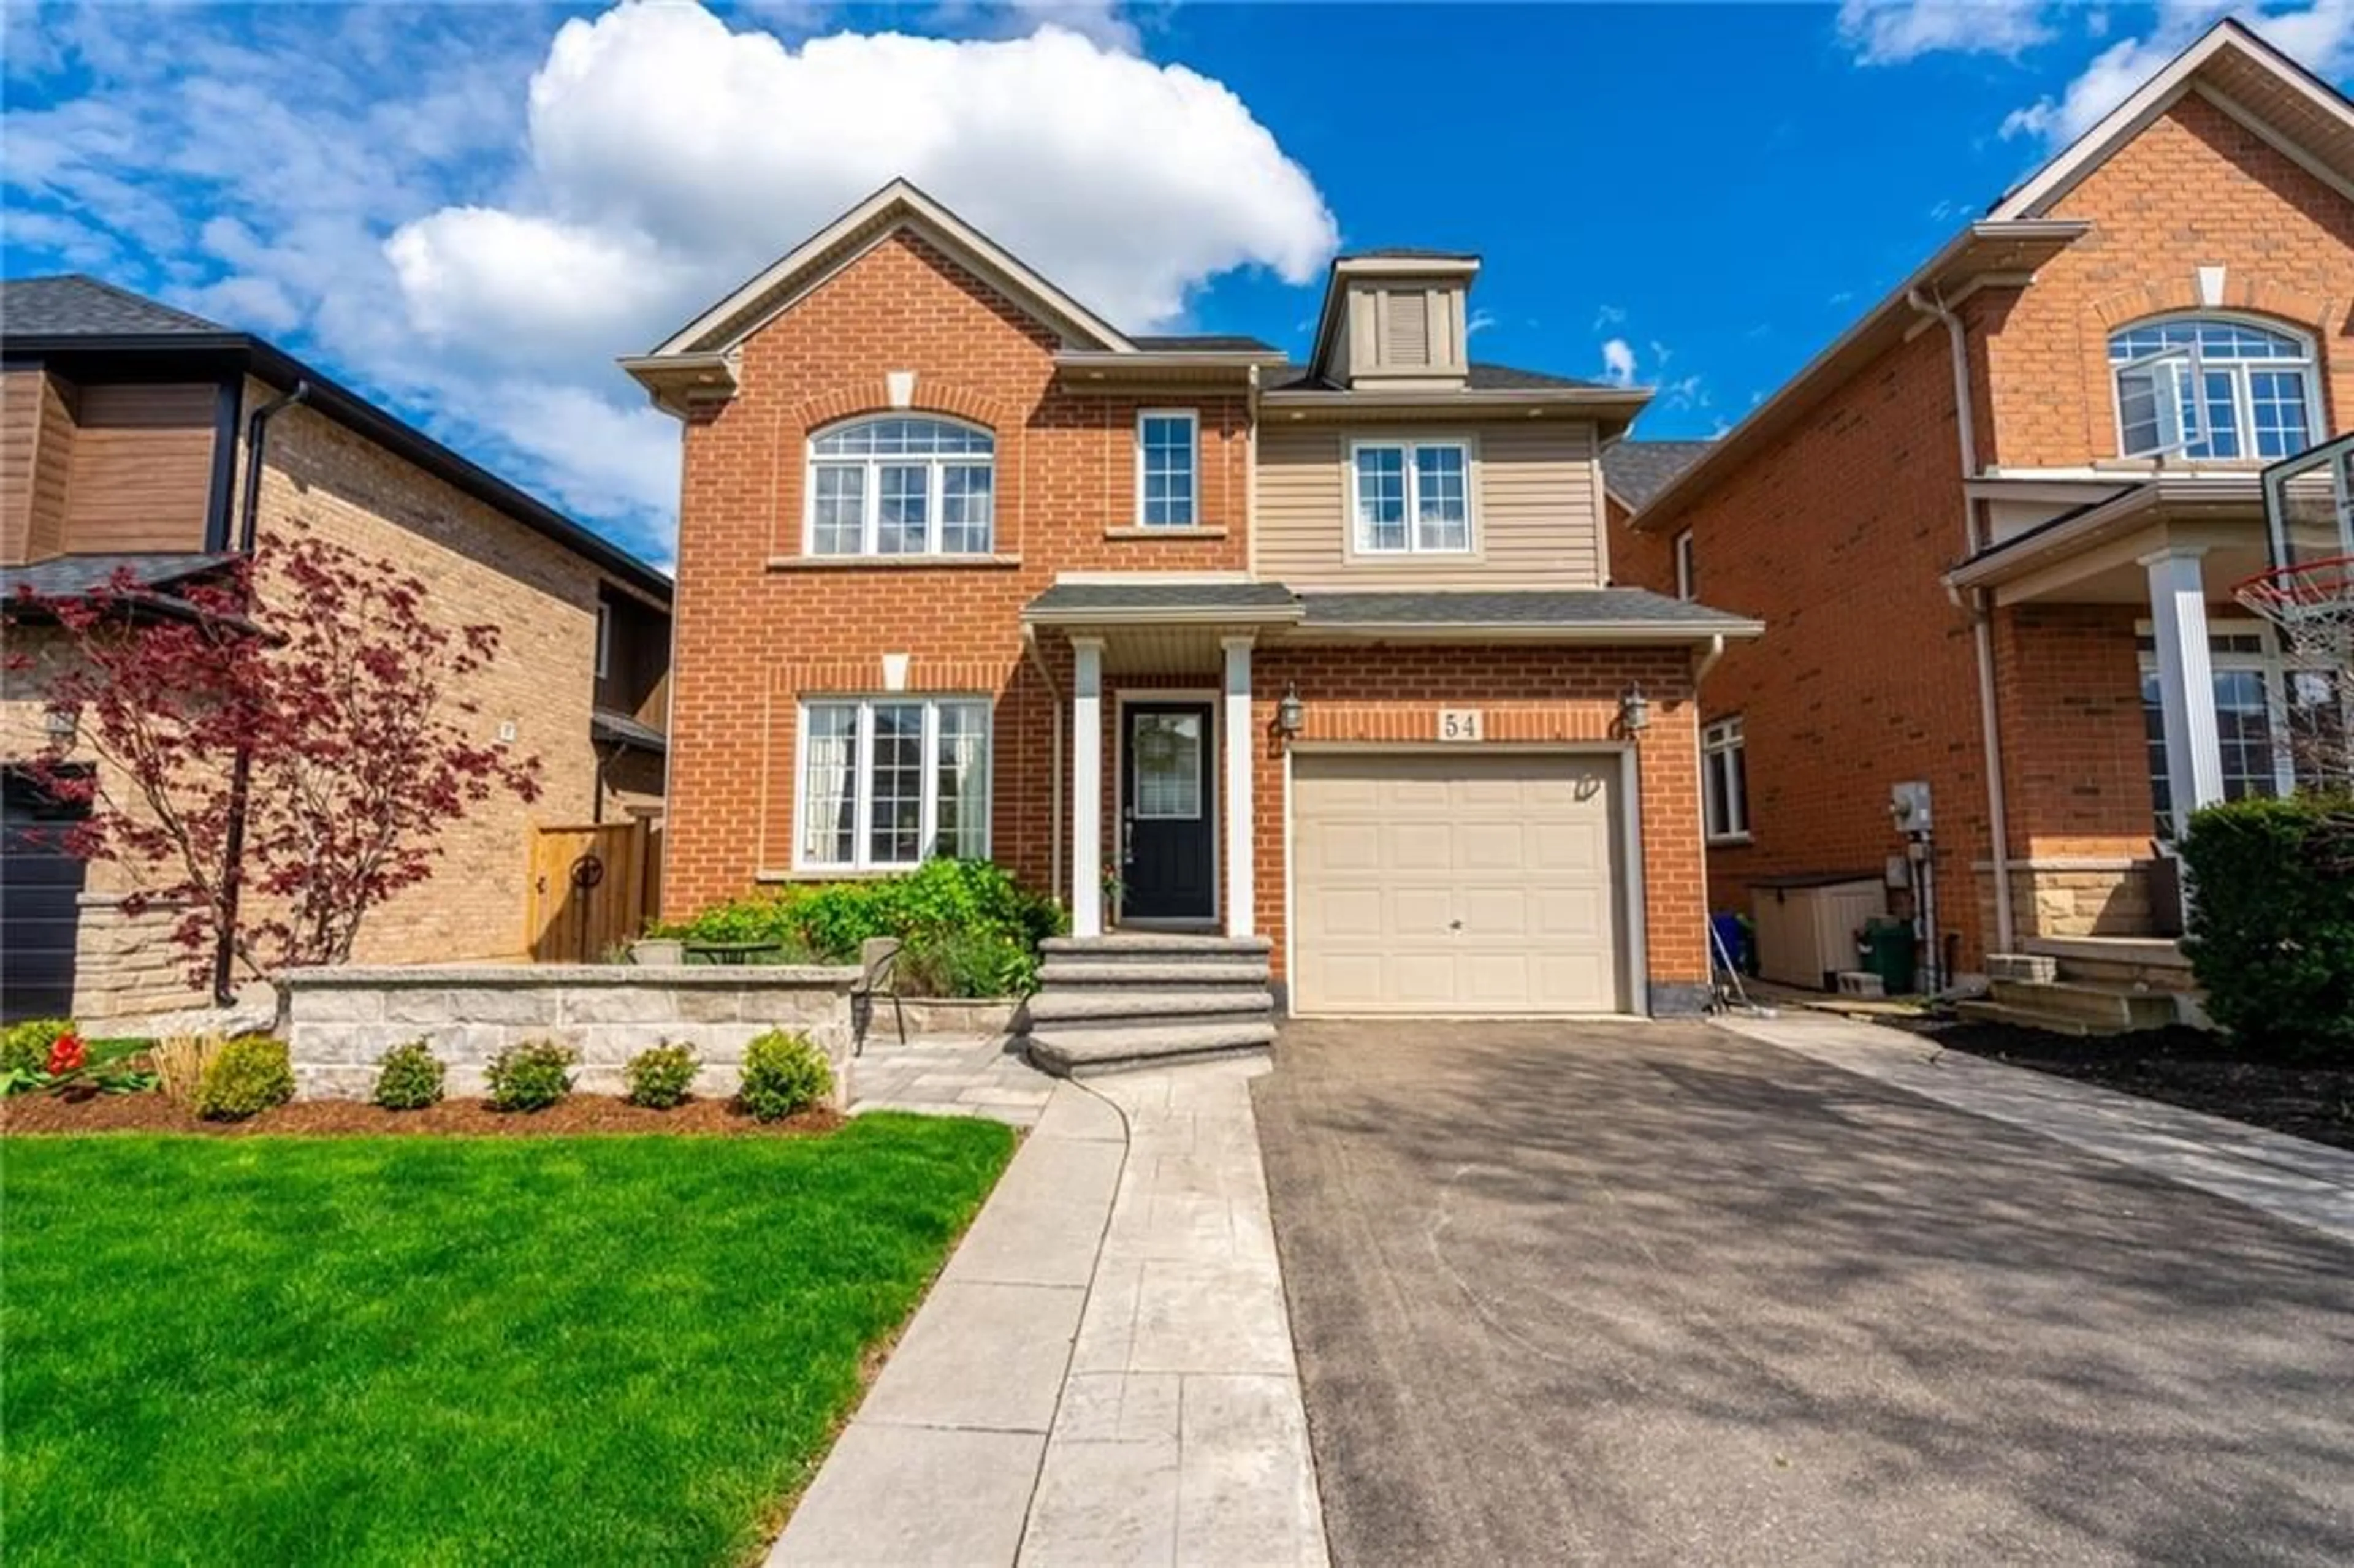 Home with brick exterior material for 54 Ivybridge Dr, Stoney Creek Ontario L8E 0A4